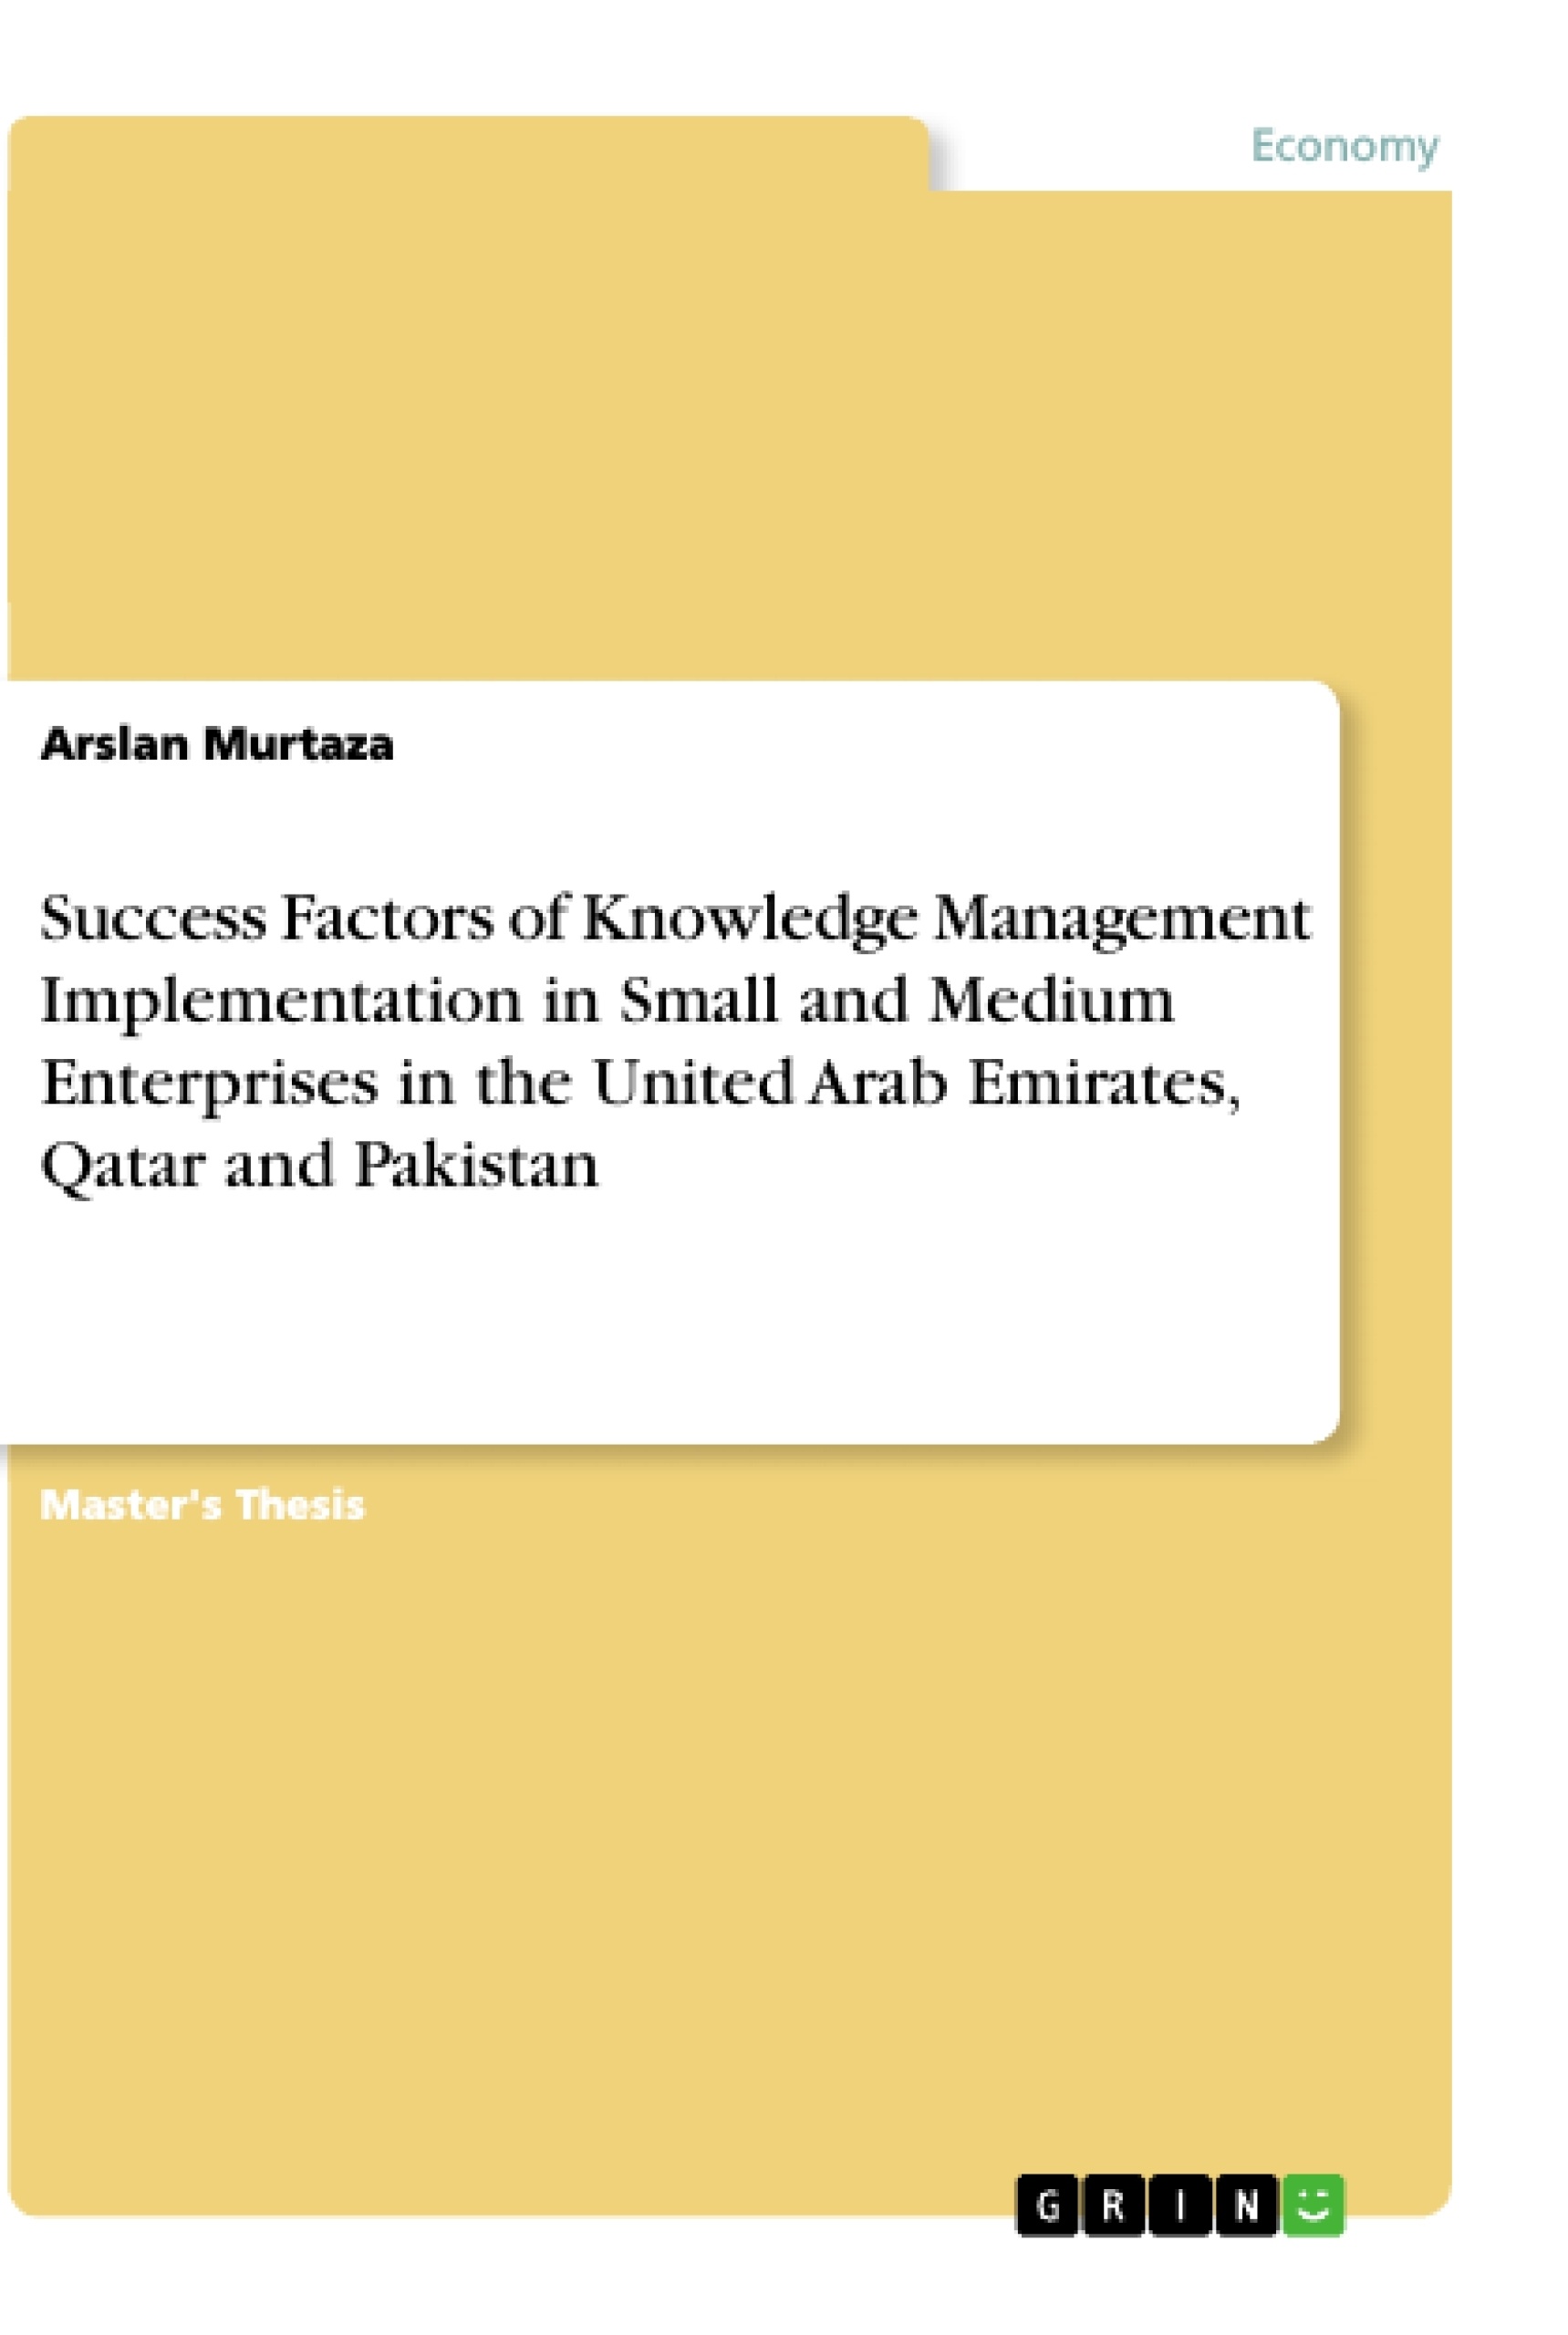 Titre: Success Factors of Knowledge Management Implementation in Small and Medium Enterprises in the United Arab Emirates, Qatar and Pakistan